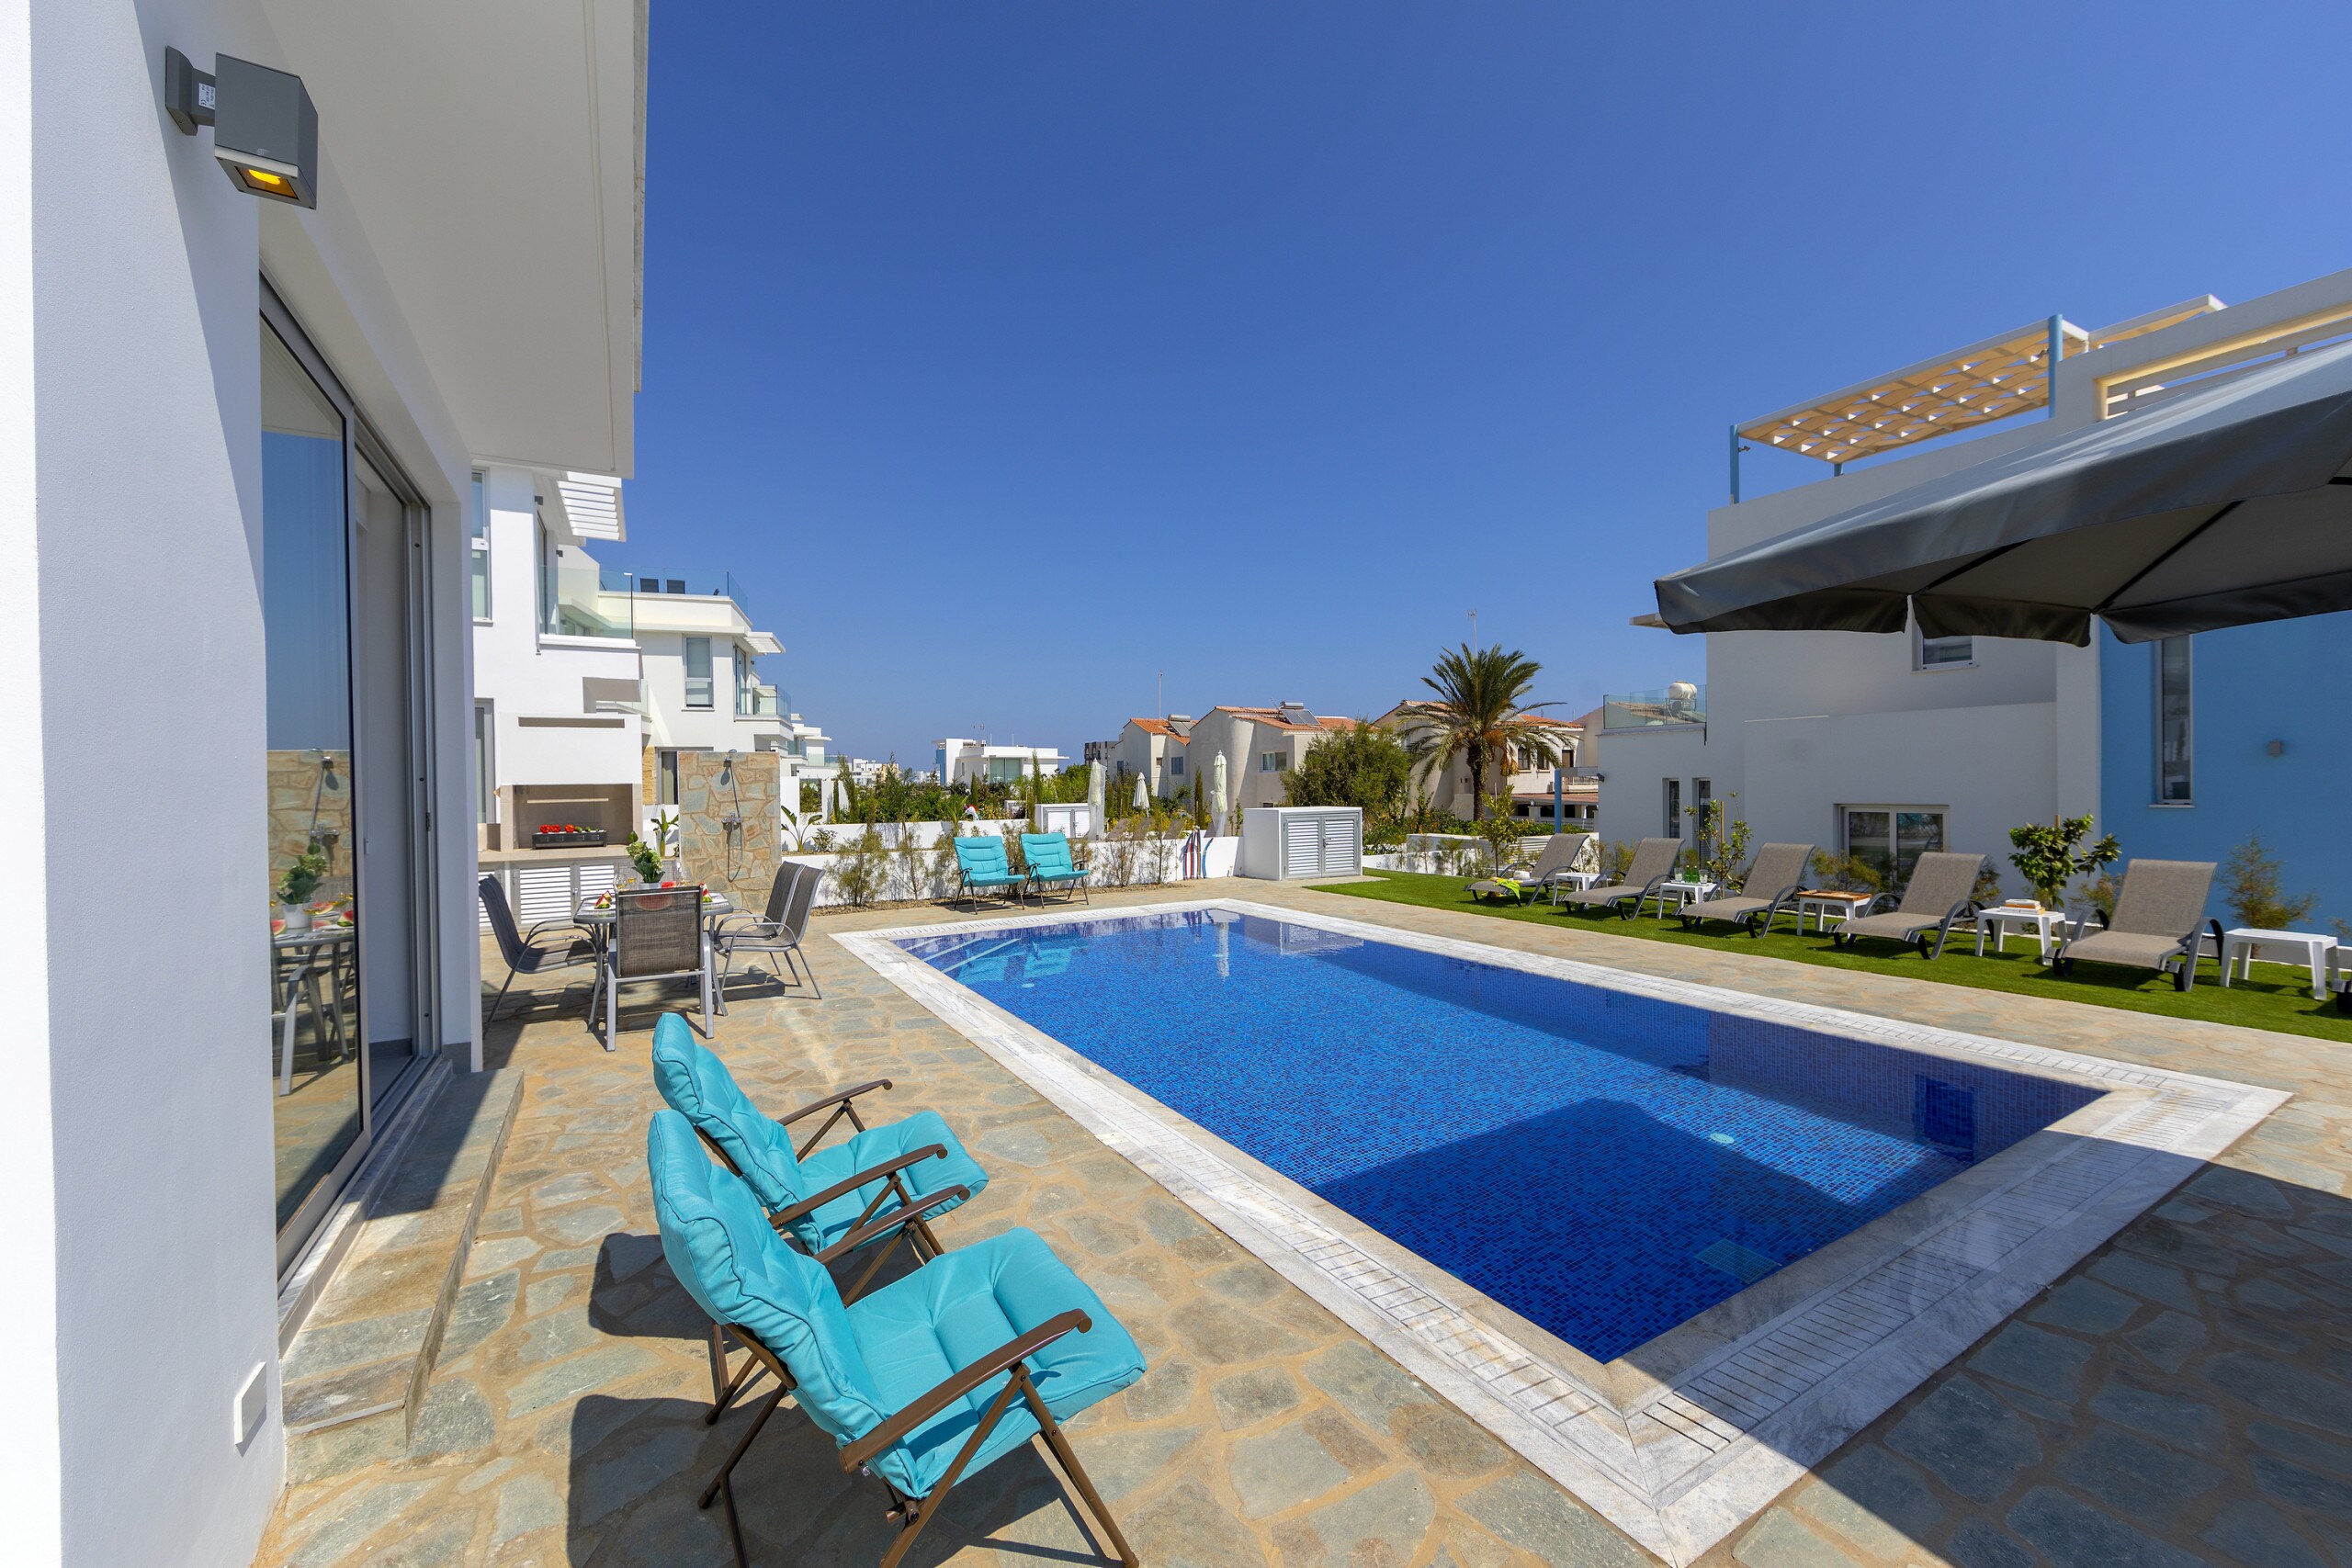 Property Image 1 - Warm Light Filled Villa with Pool close to Mimosa Beach